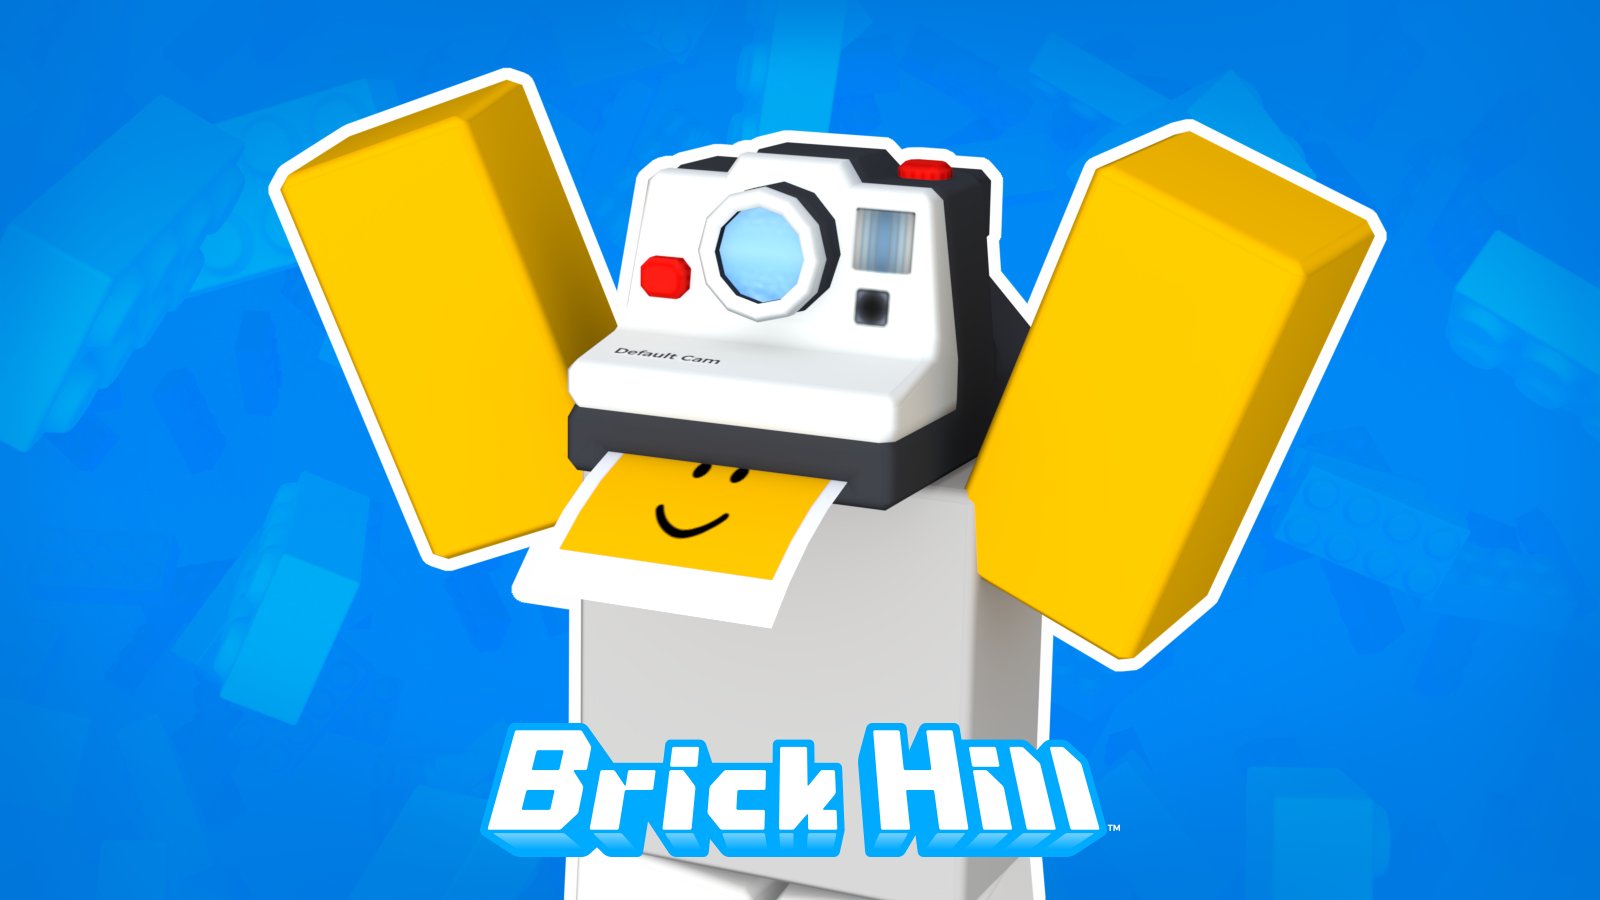 How to play brick hill in 2022 